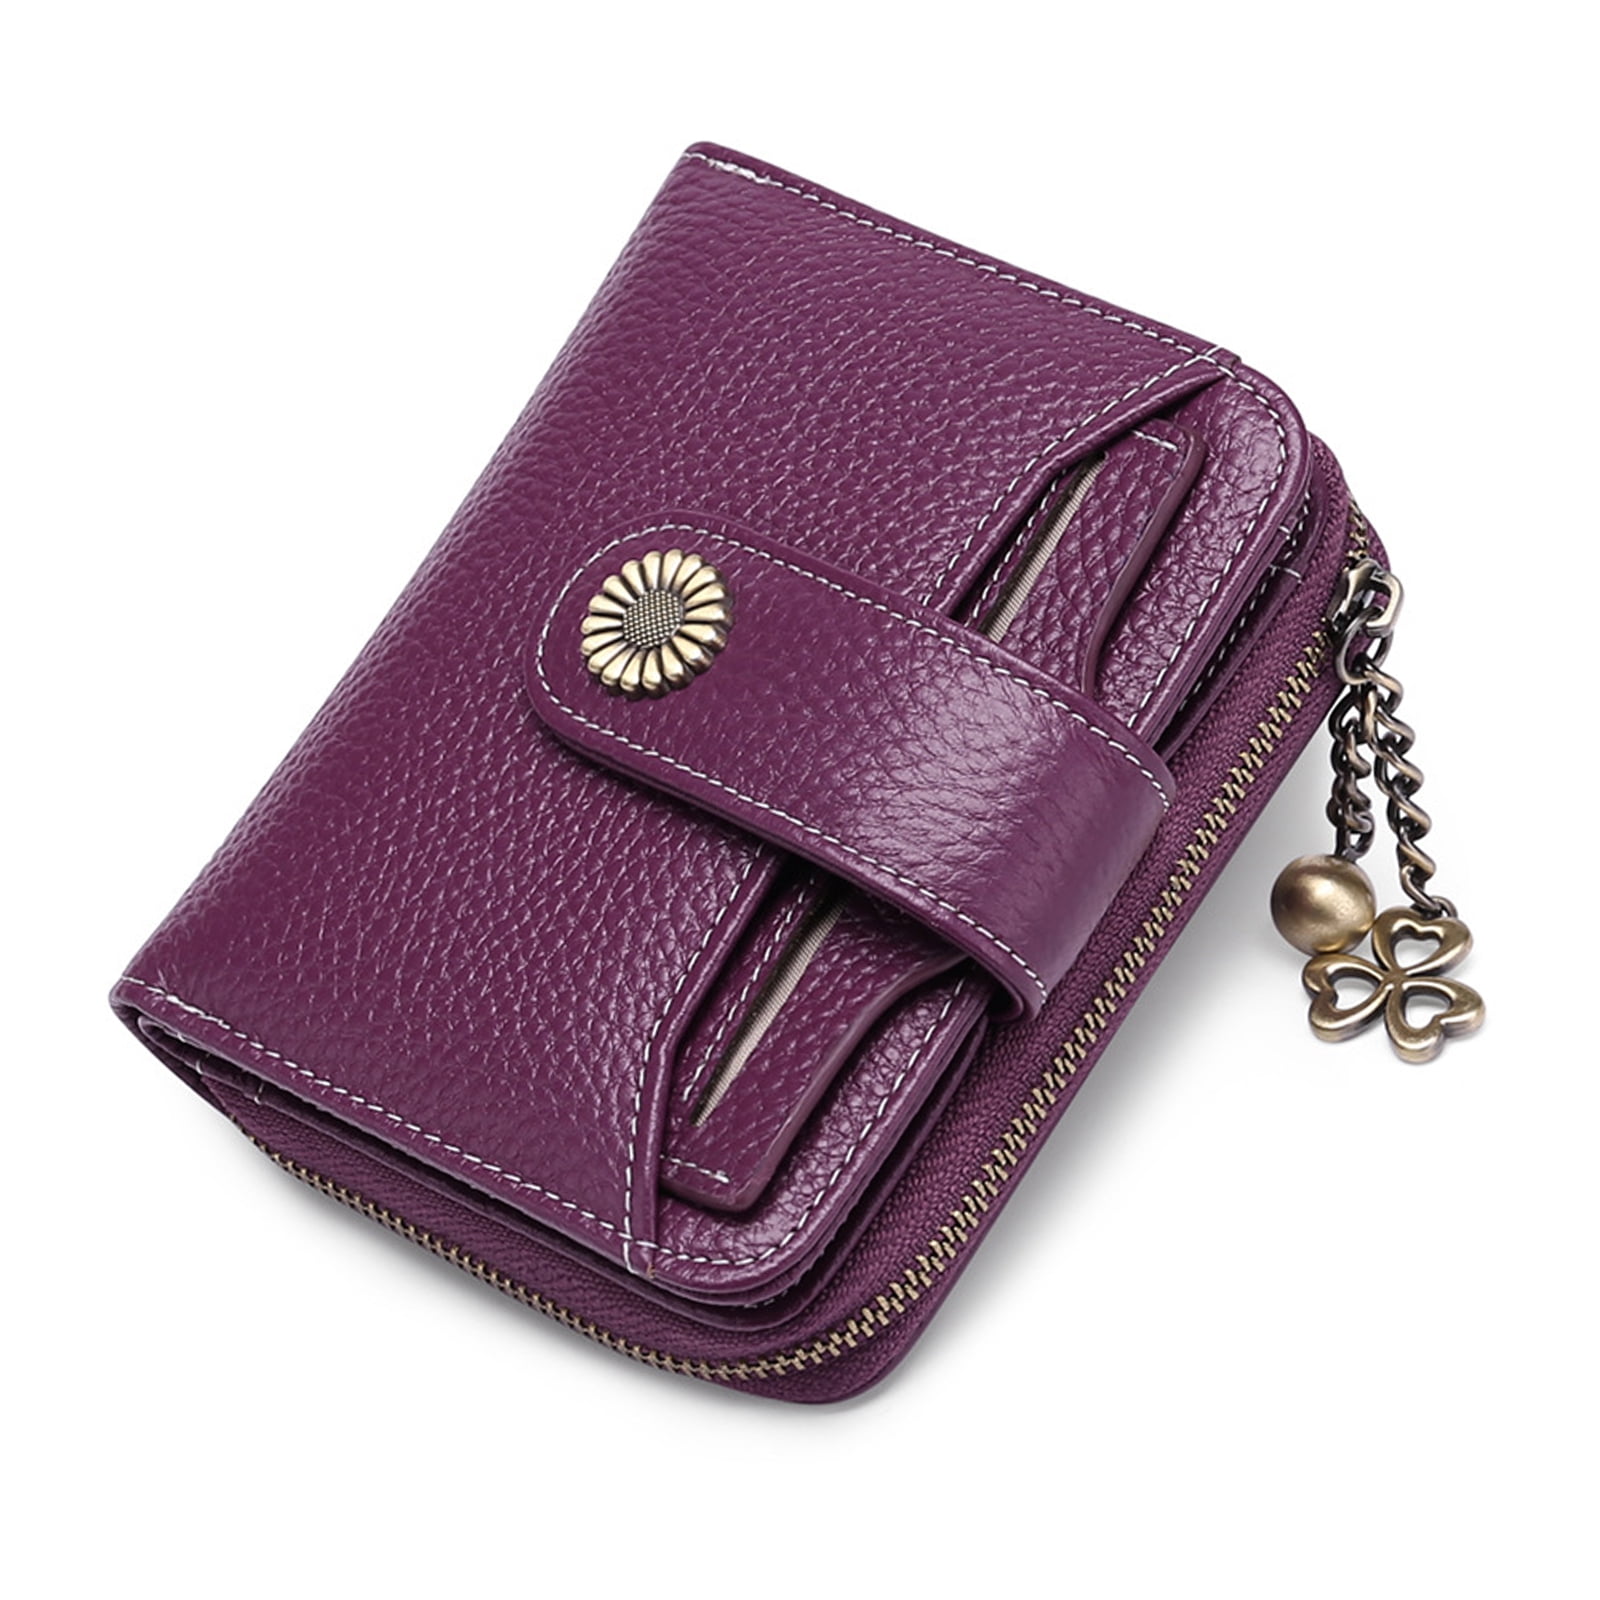 Wallet Women Card Holder Snap Closure Small Lock PU Leather Metal Frame  Love Heart Gift Short Clutch Purse Coin Pocket Mini Portable Tri-fold(Purple)  : Amazon.in: Bags, Wallets and Luggage